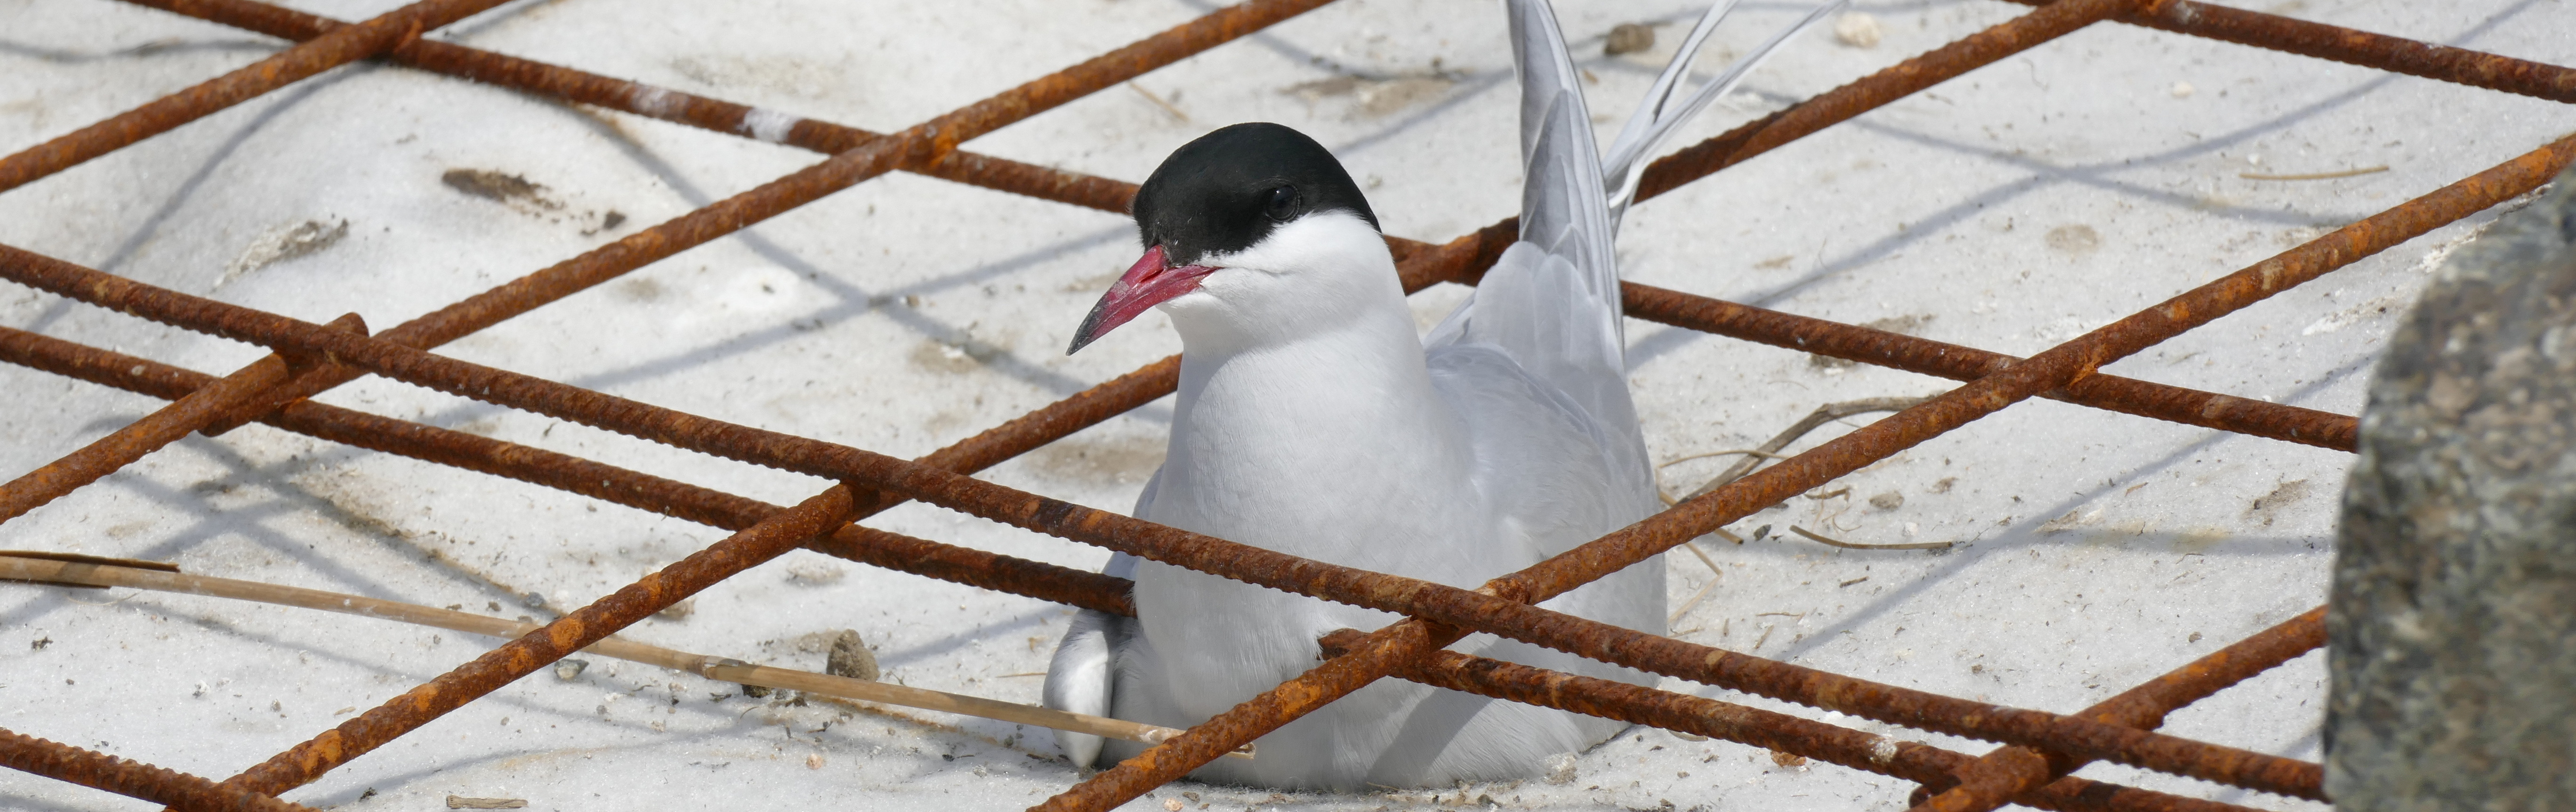 Common tern sitting on its clutch of eggs at a construction site.